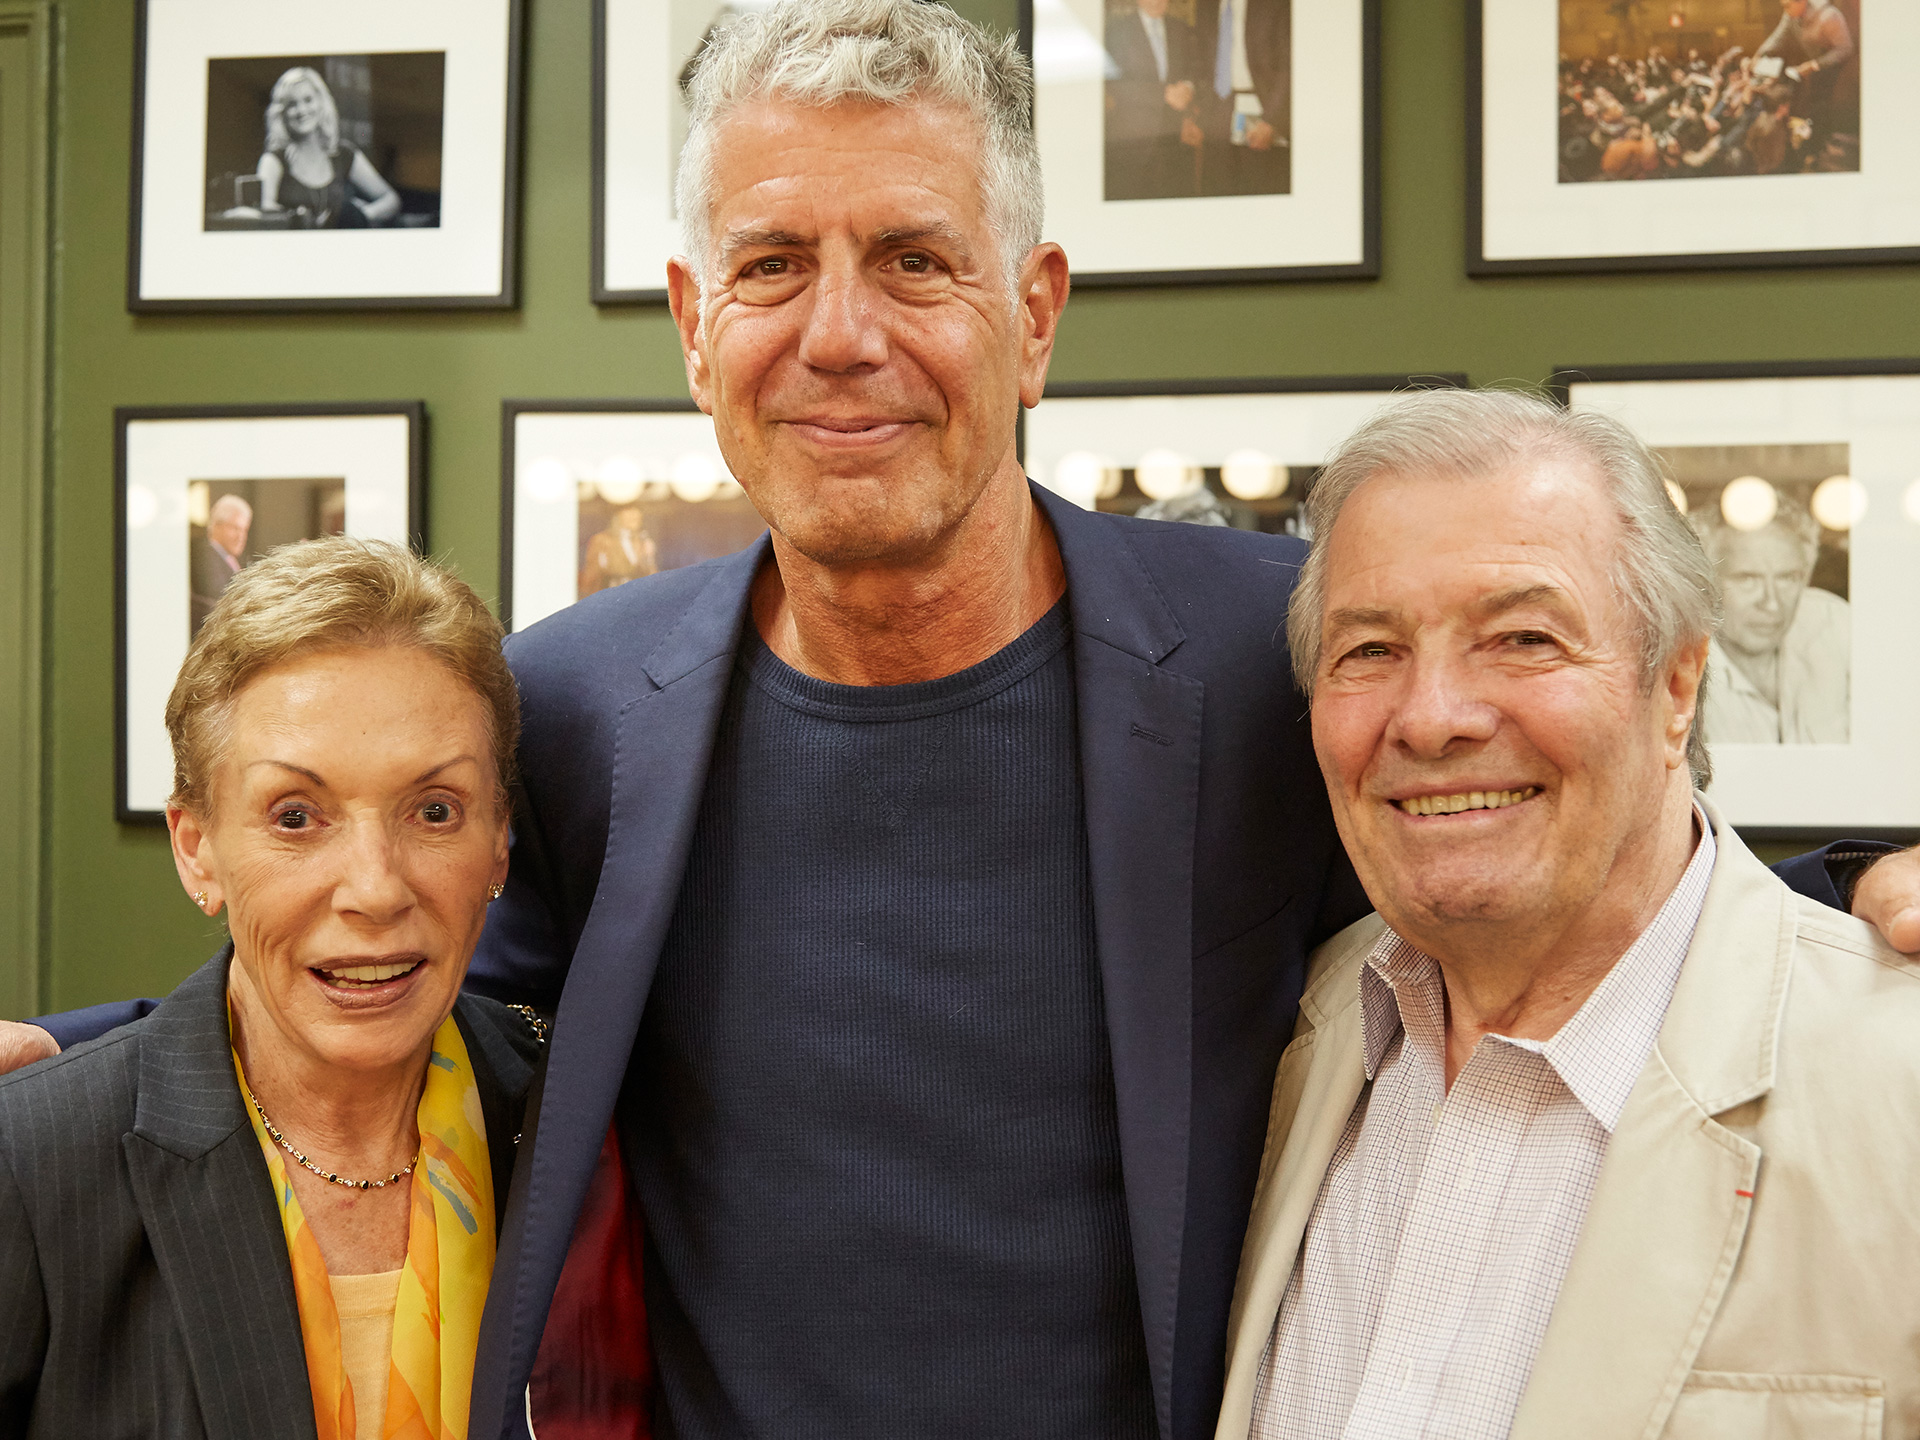 Gloria Pépin, Anthony Bourdain and Jacques Pépin at event in October 2015 at the 92nd Street Y in New York City. Tony moderated a discussion about Jacques” book Heart and Soul.